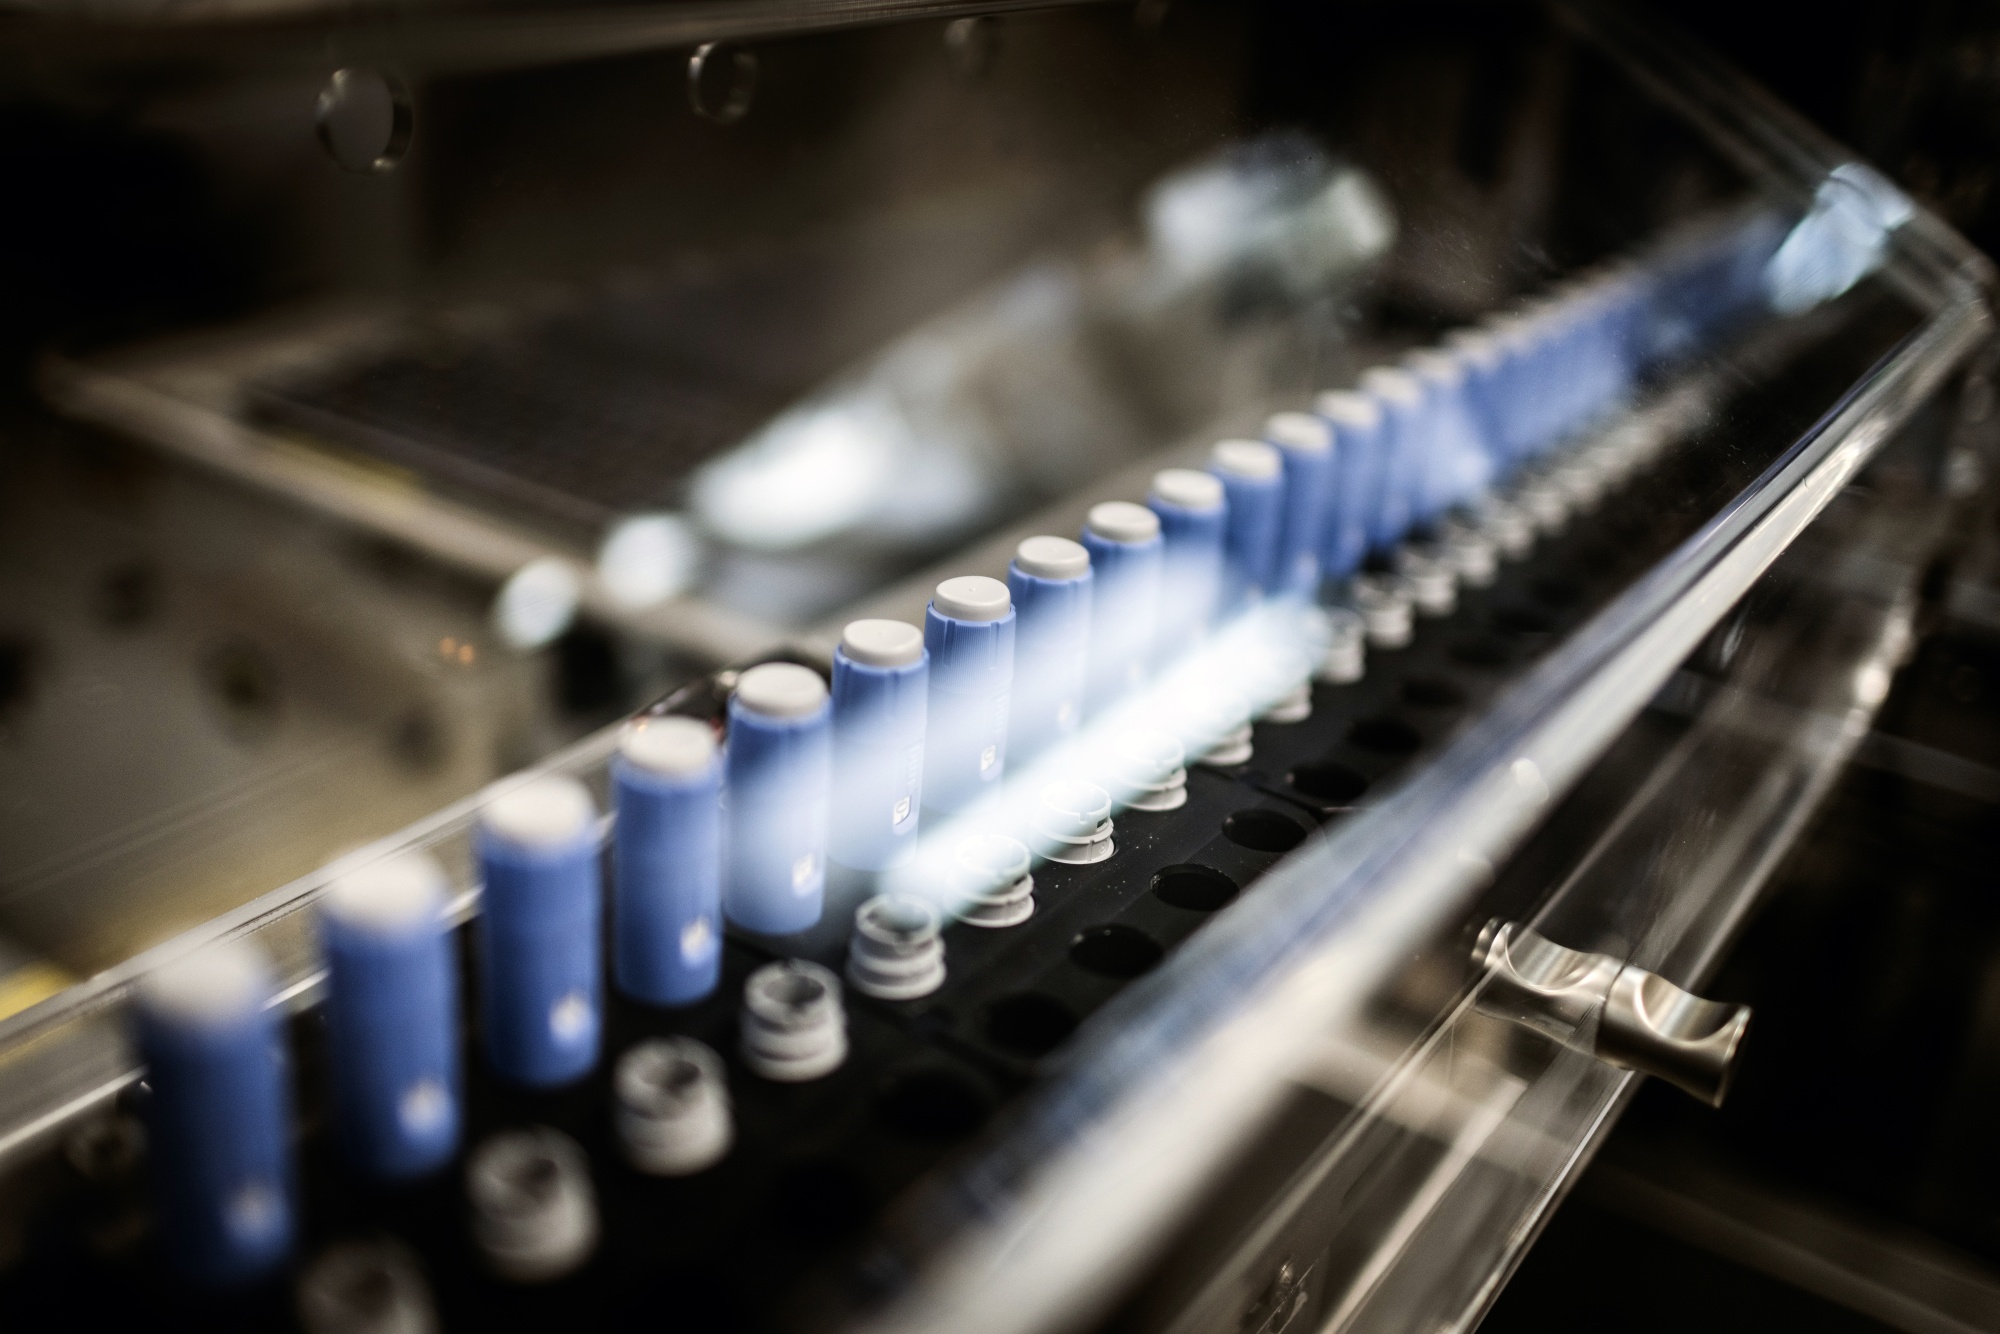 Ozempic and Wegovy injection pen parts at the Novo Nordisk production facilities in Hillerod, Denmark.